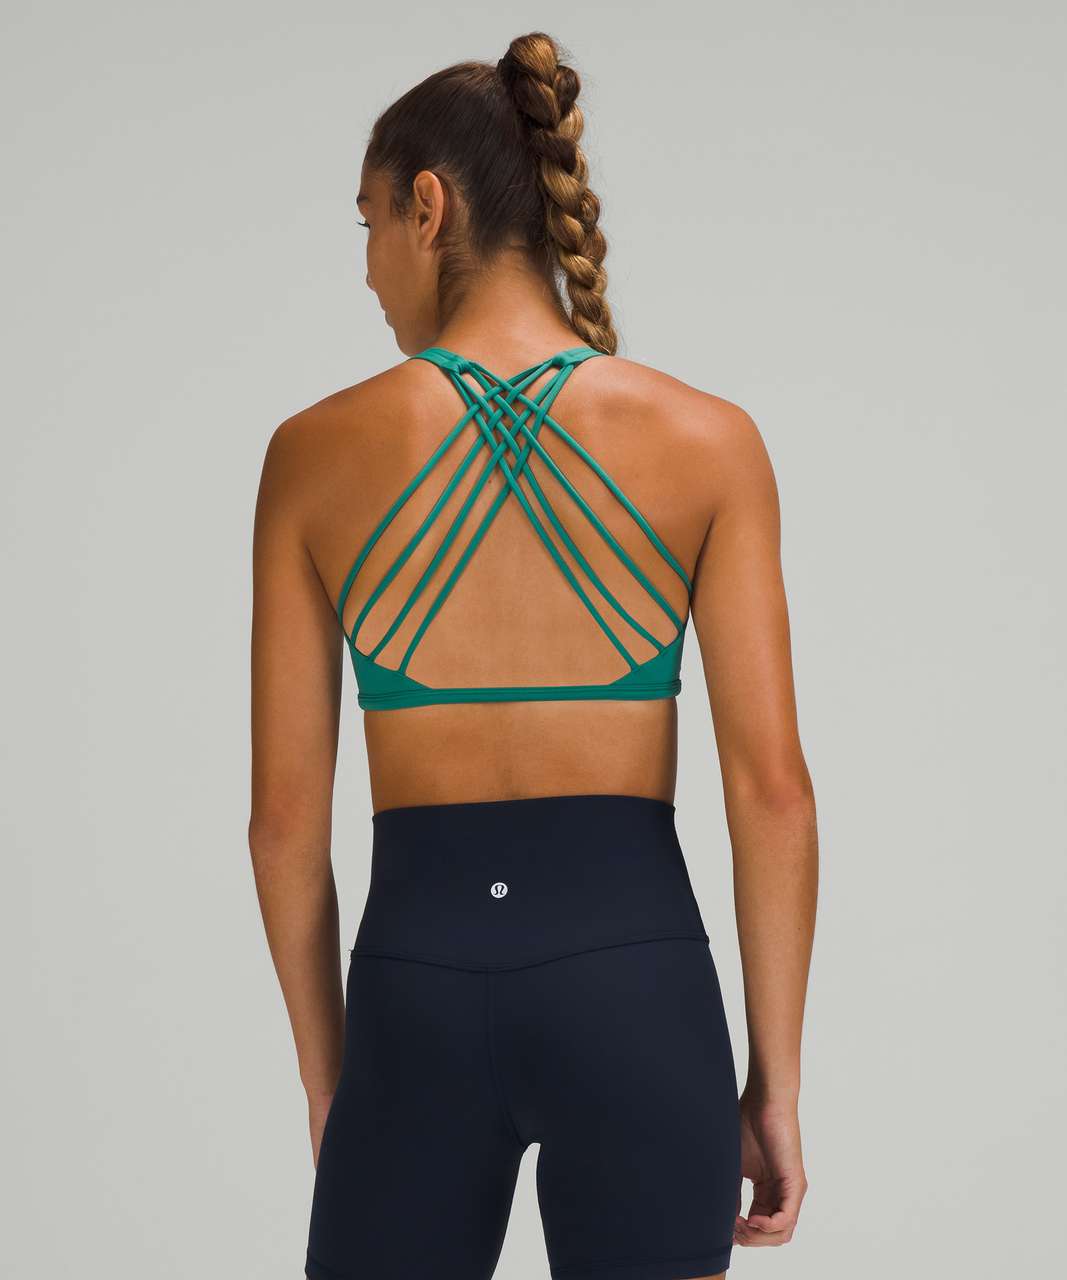 Back by popular demand: the Free to be Wild bra by #lululemon at